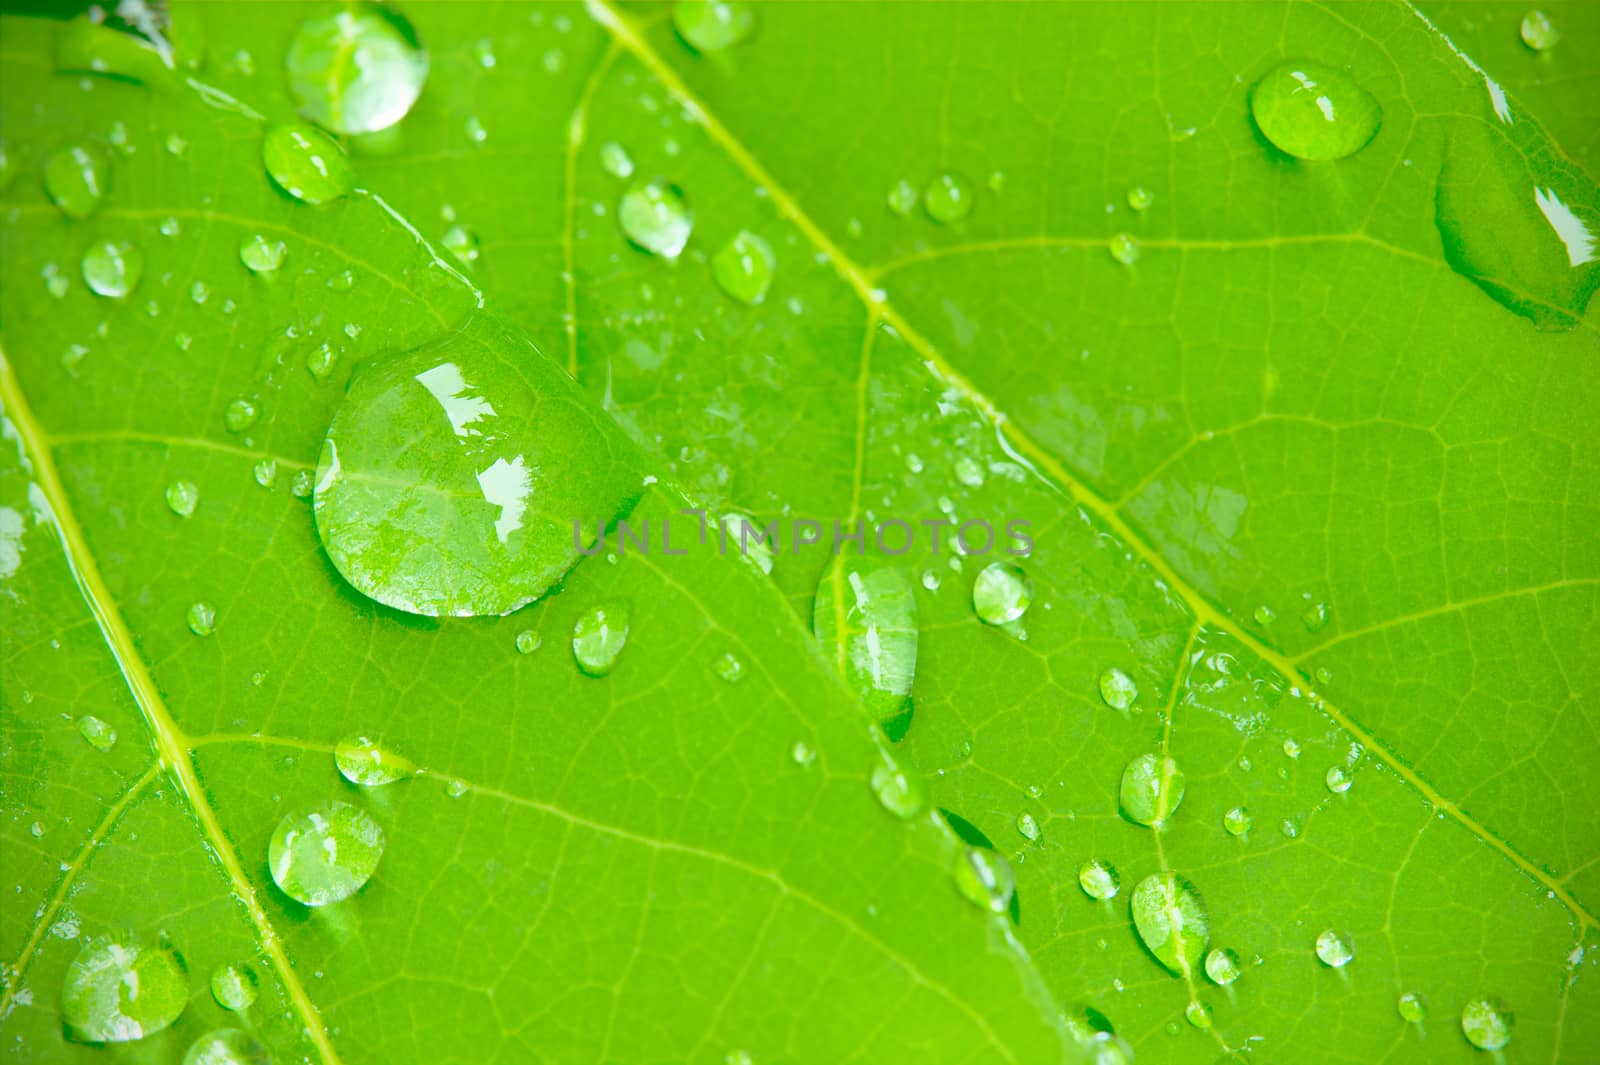 Closeup dew drops on leaves in the morning sunlight and green environment. Water droplets come from the rain on the leaves. The concept of beauty and perfection that nature has created.